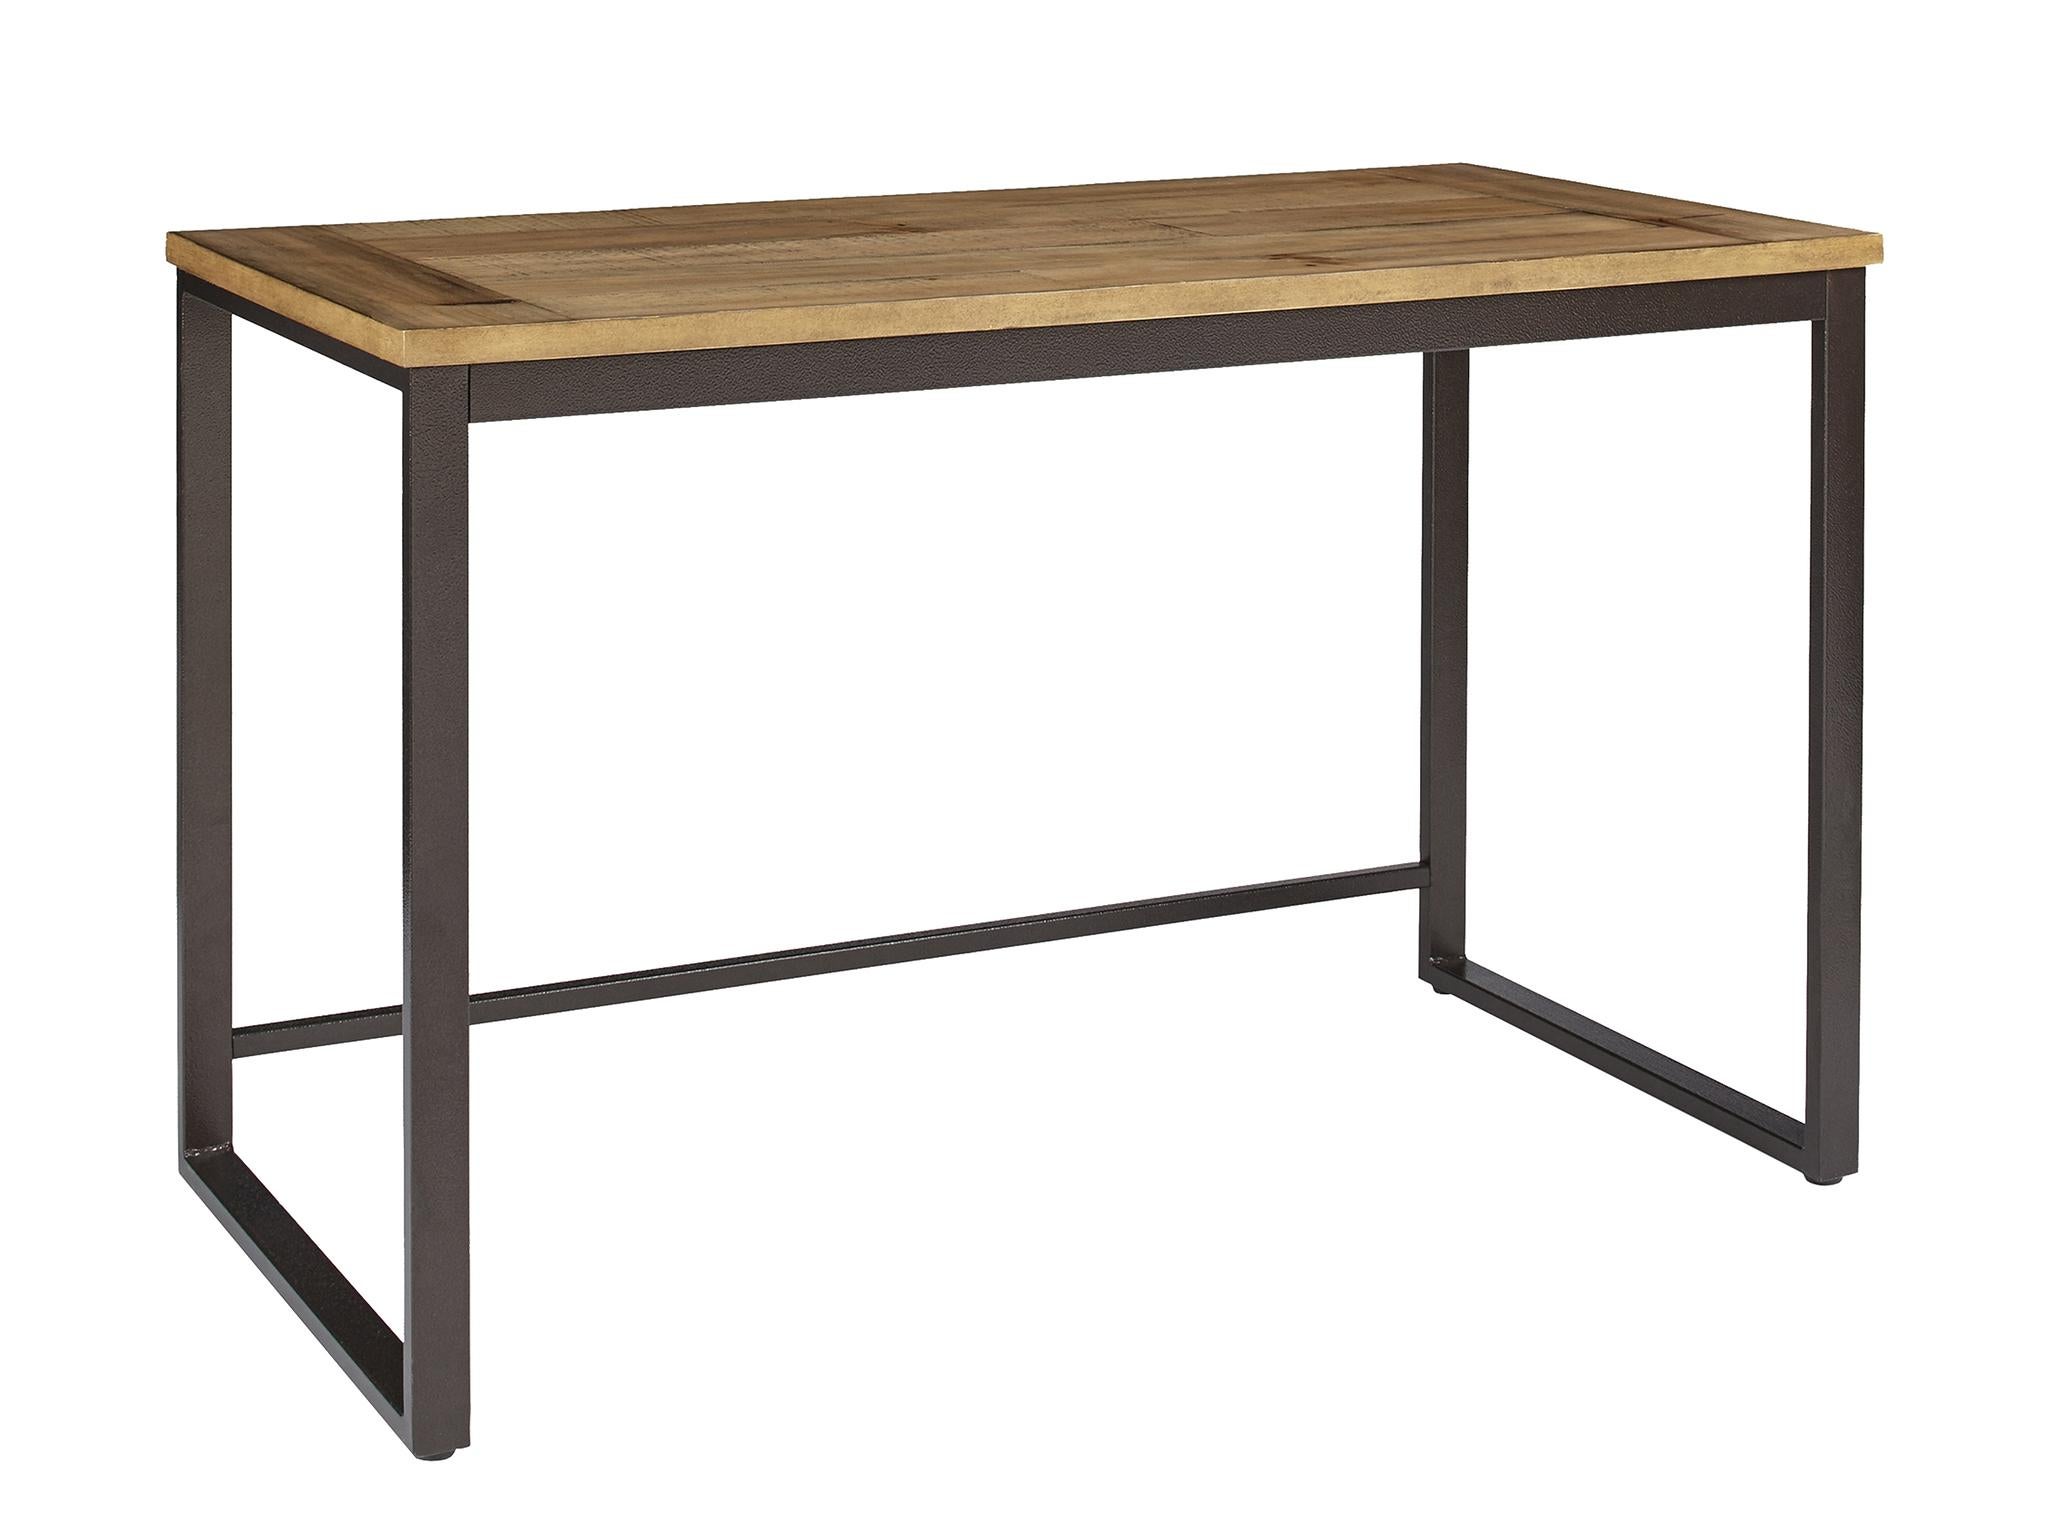 Best Desks That Are Stylish And Functional With Storage Space